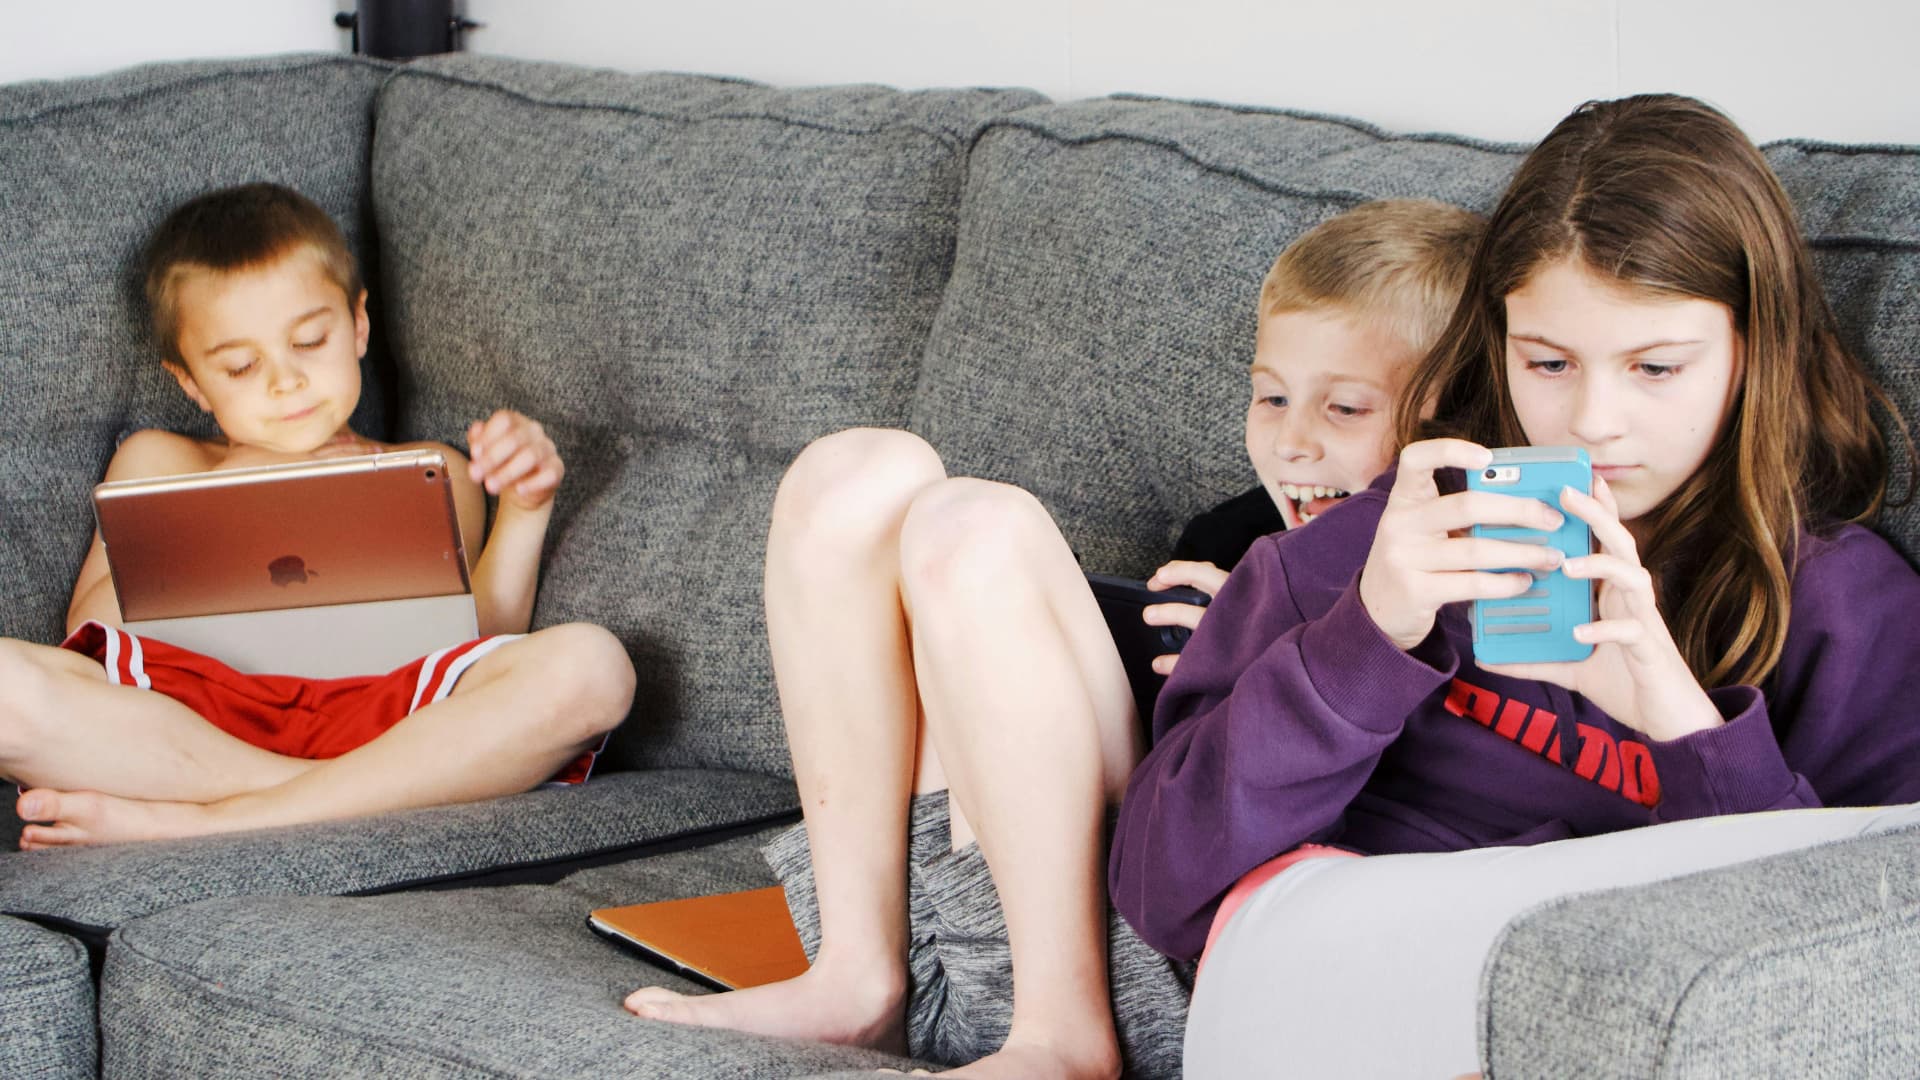 Three children sitting on a sofa and using iPhone and iPad